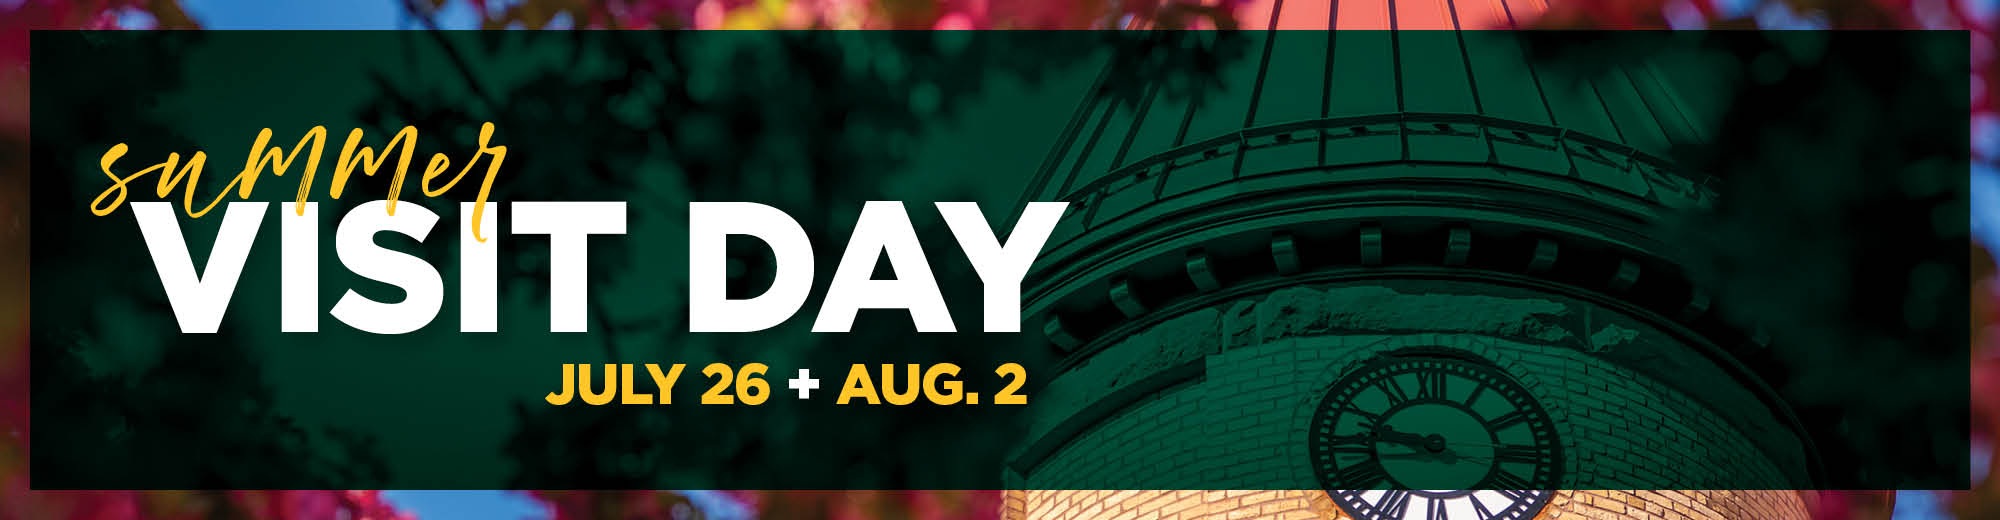 Summer Visit Day events offered on July 26 and Aug. 2 